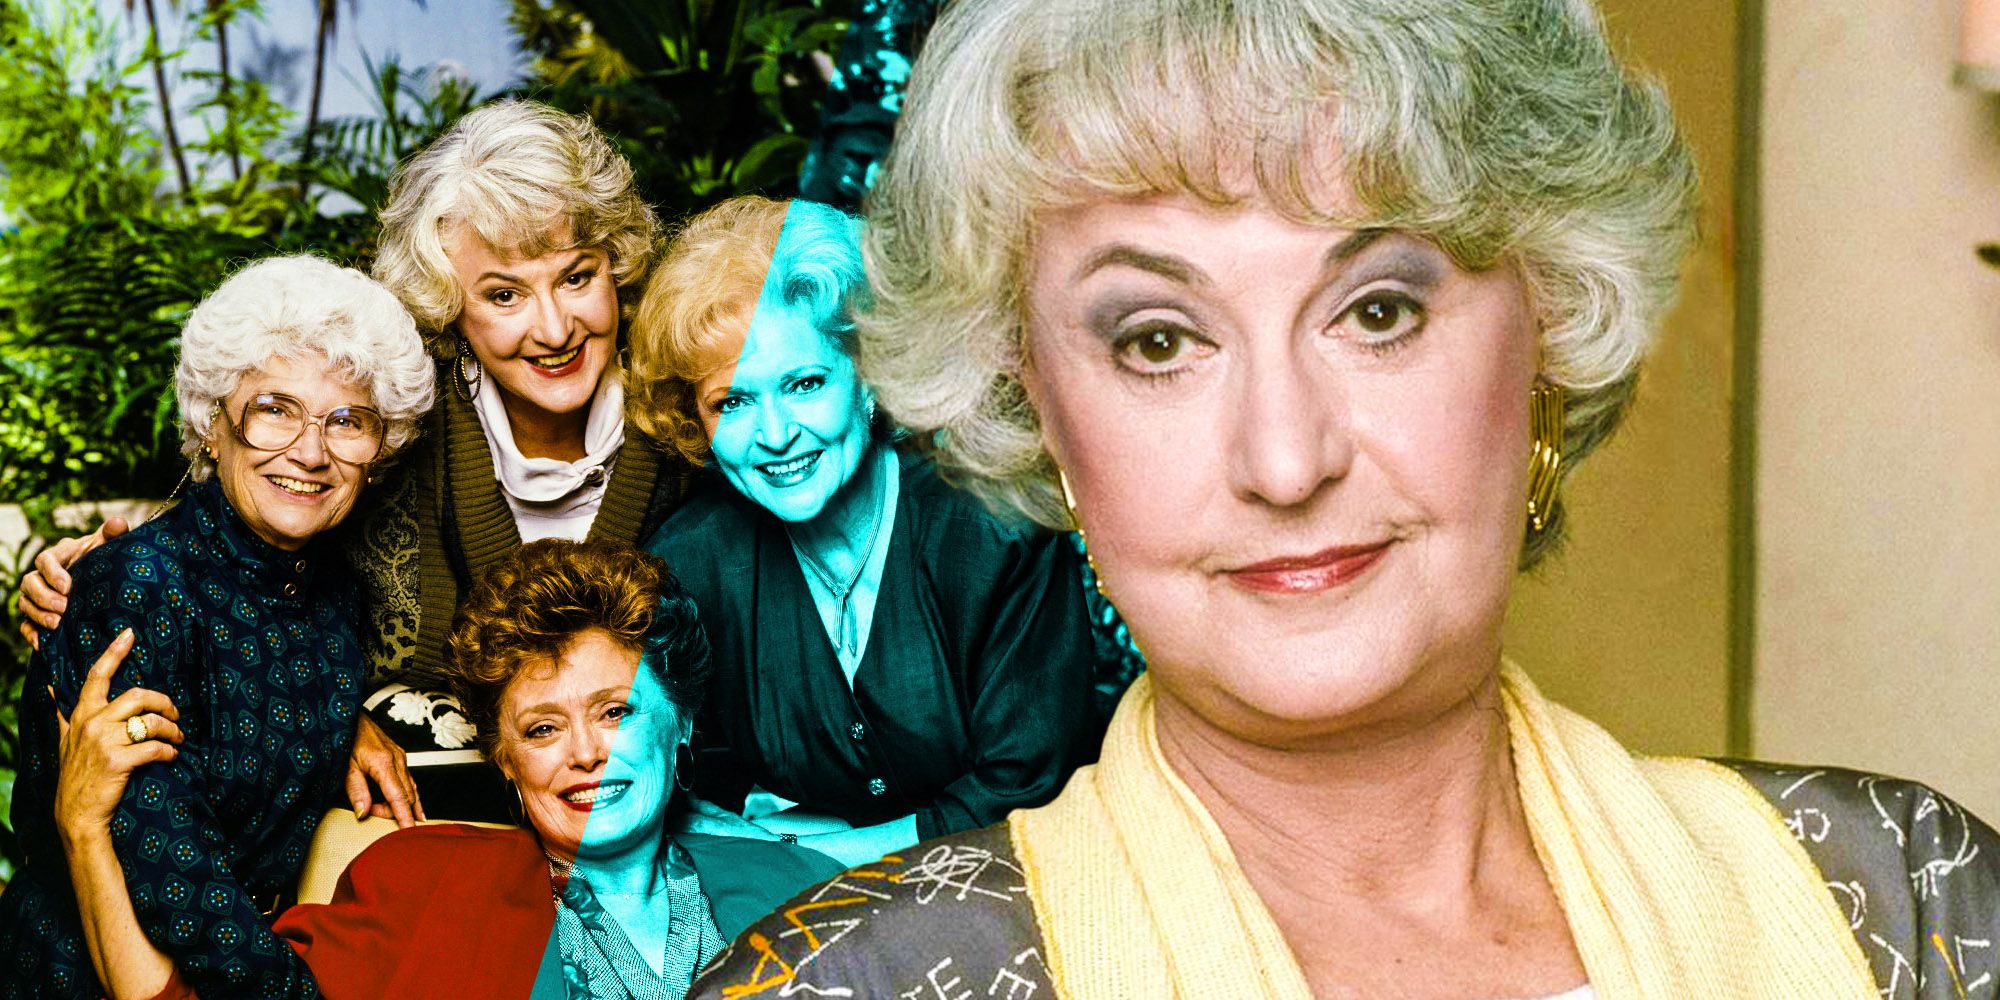 Where to watch The Golden Girls TV series streaming online